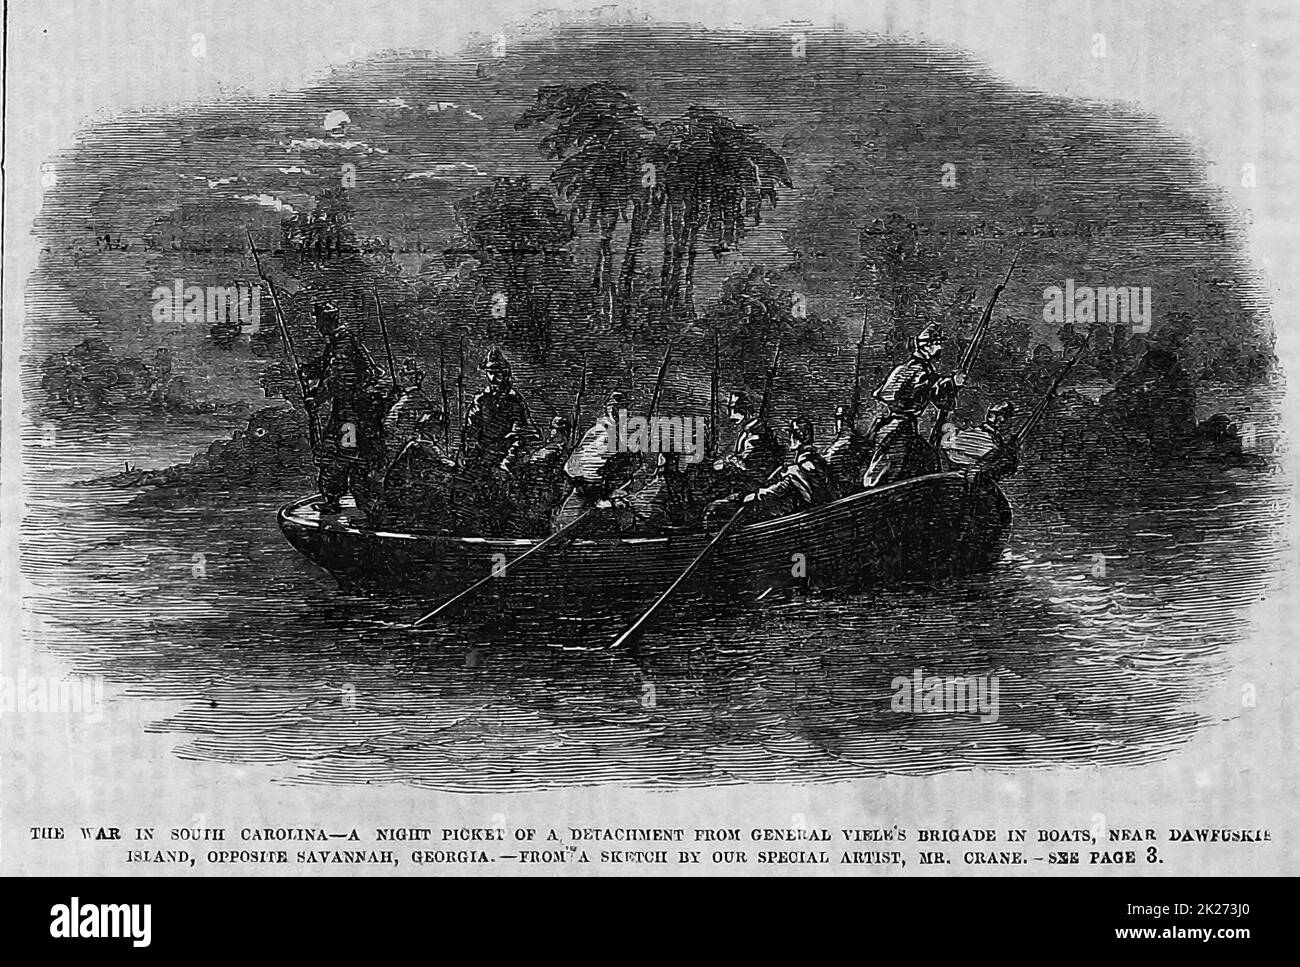 The War in South Carolina - A night picket of a detachment from General Egbert Ludovicus Viele's brigade in boats, near Daufuskie Island, opposite Savannah, Georgia. April 1862. 19th century American Civil War illustration from Frank Leslie's Illustrated Newspaper Stock Photo